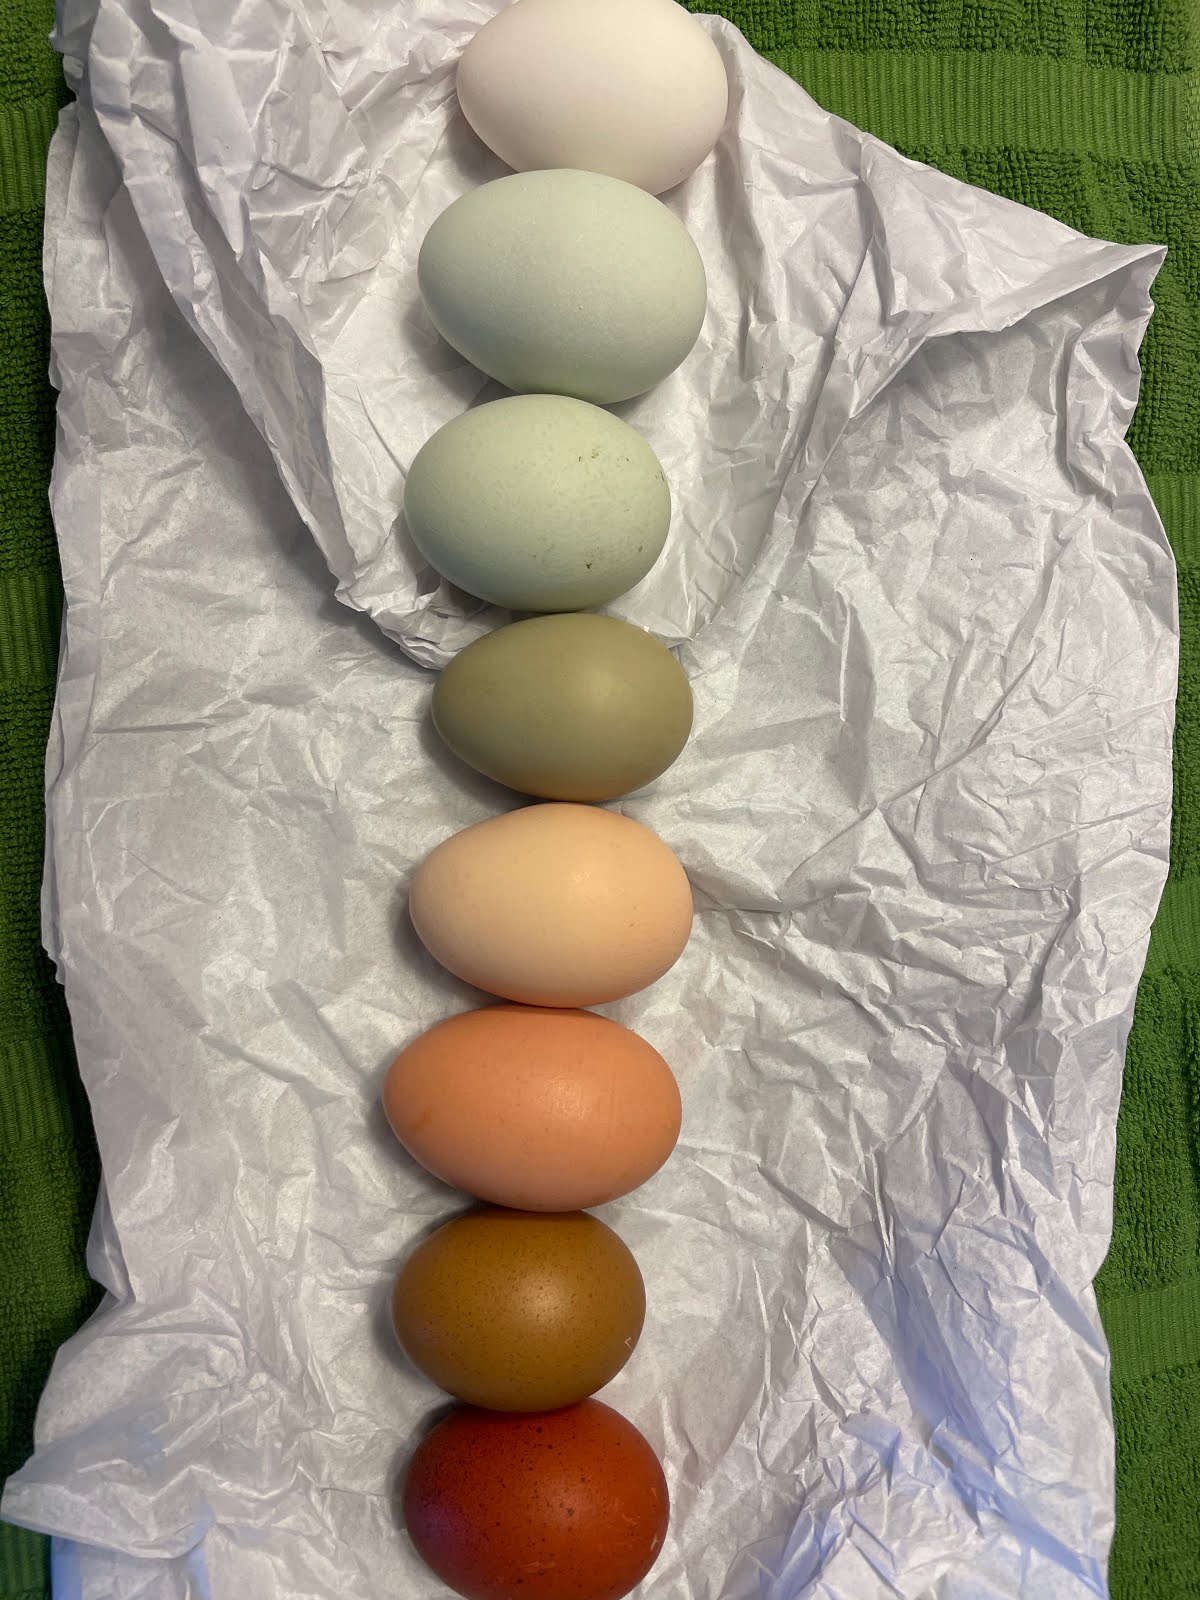 Eggs from Our Farm